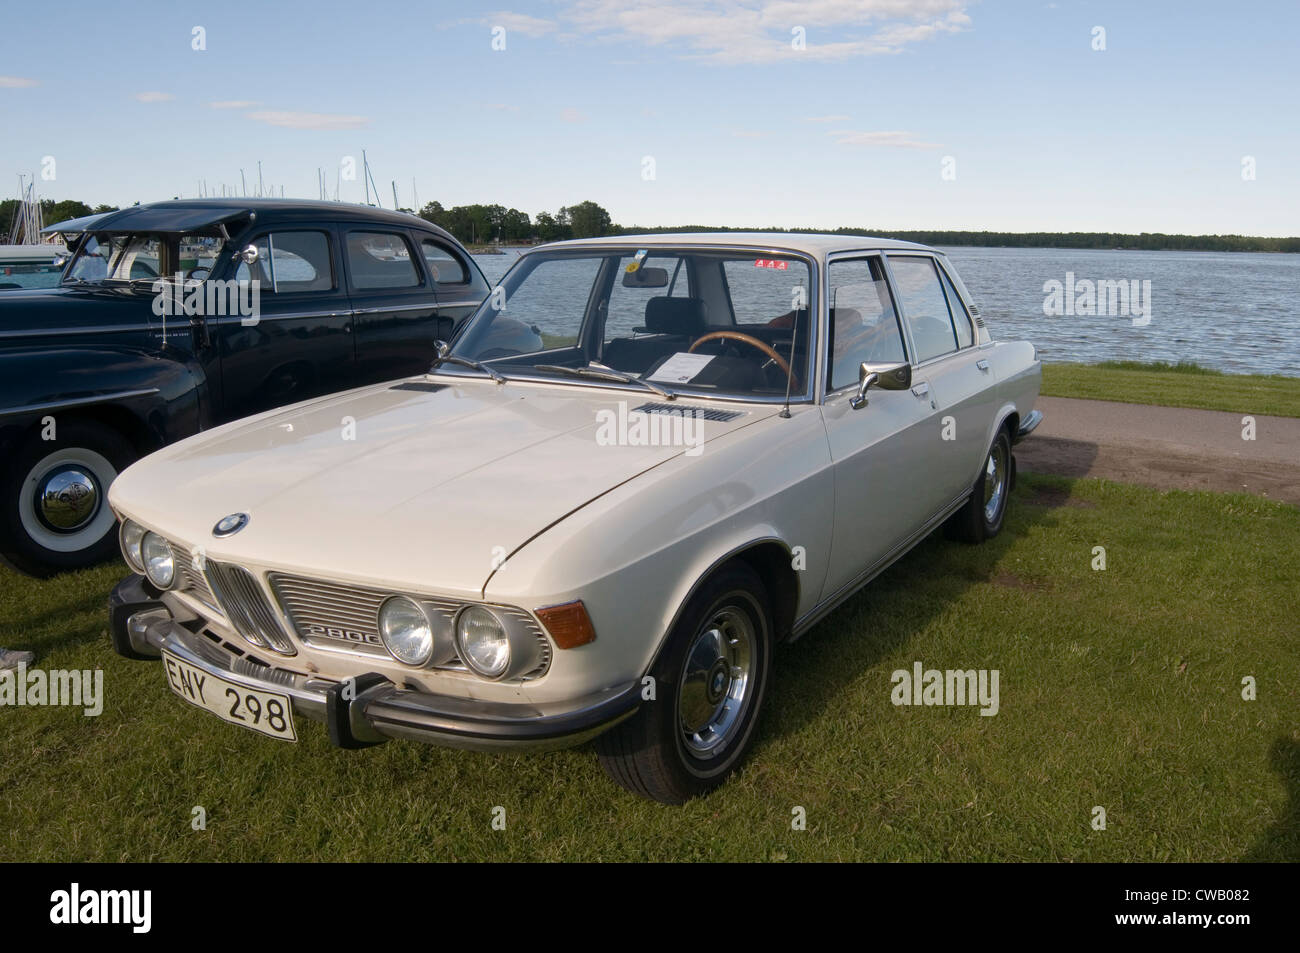 Bmw 5 Series High Resolution Stock Photography And Images Alamy